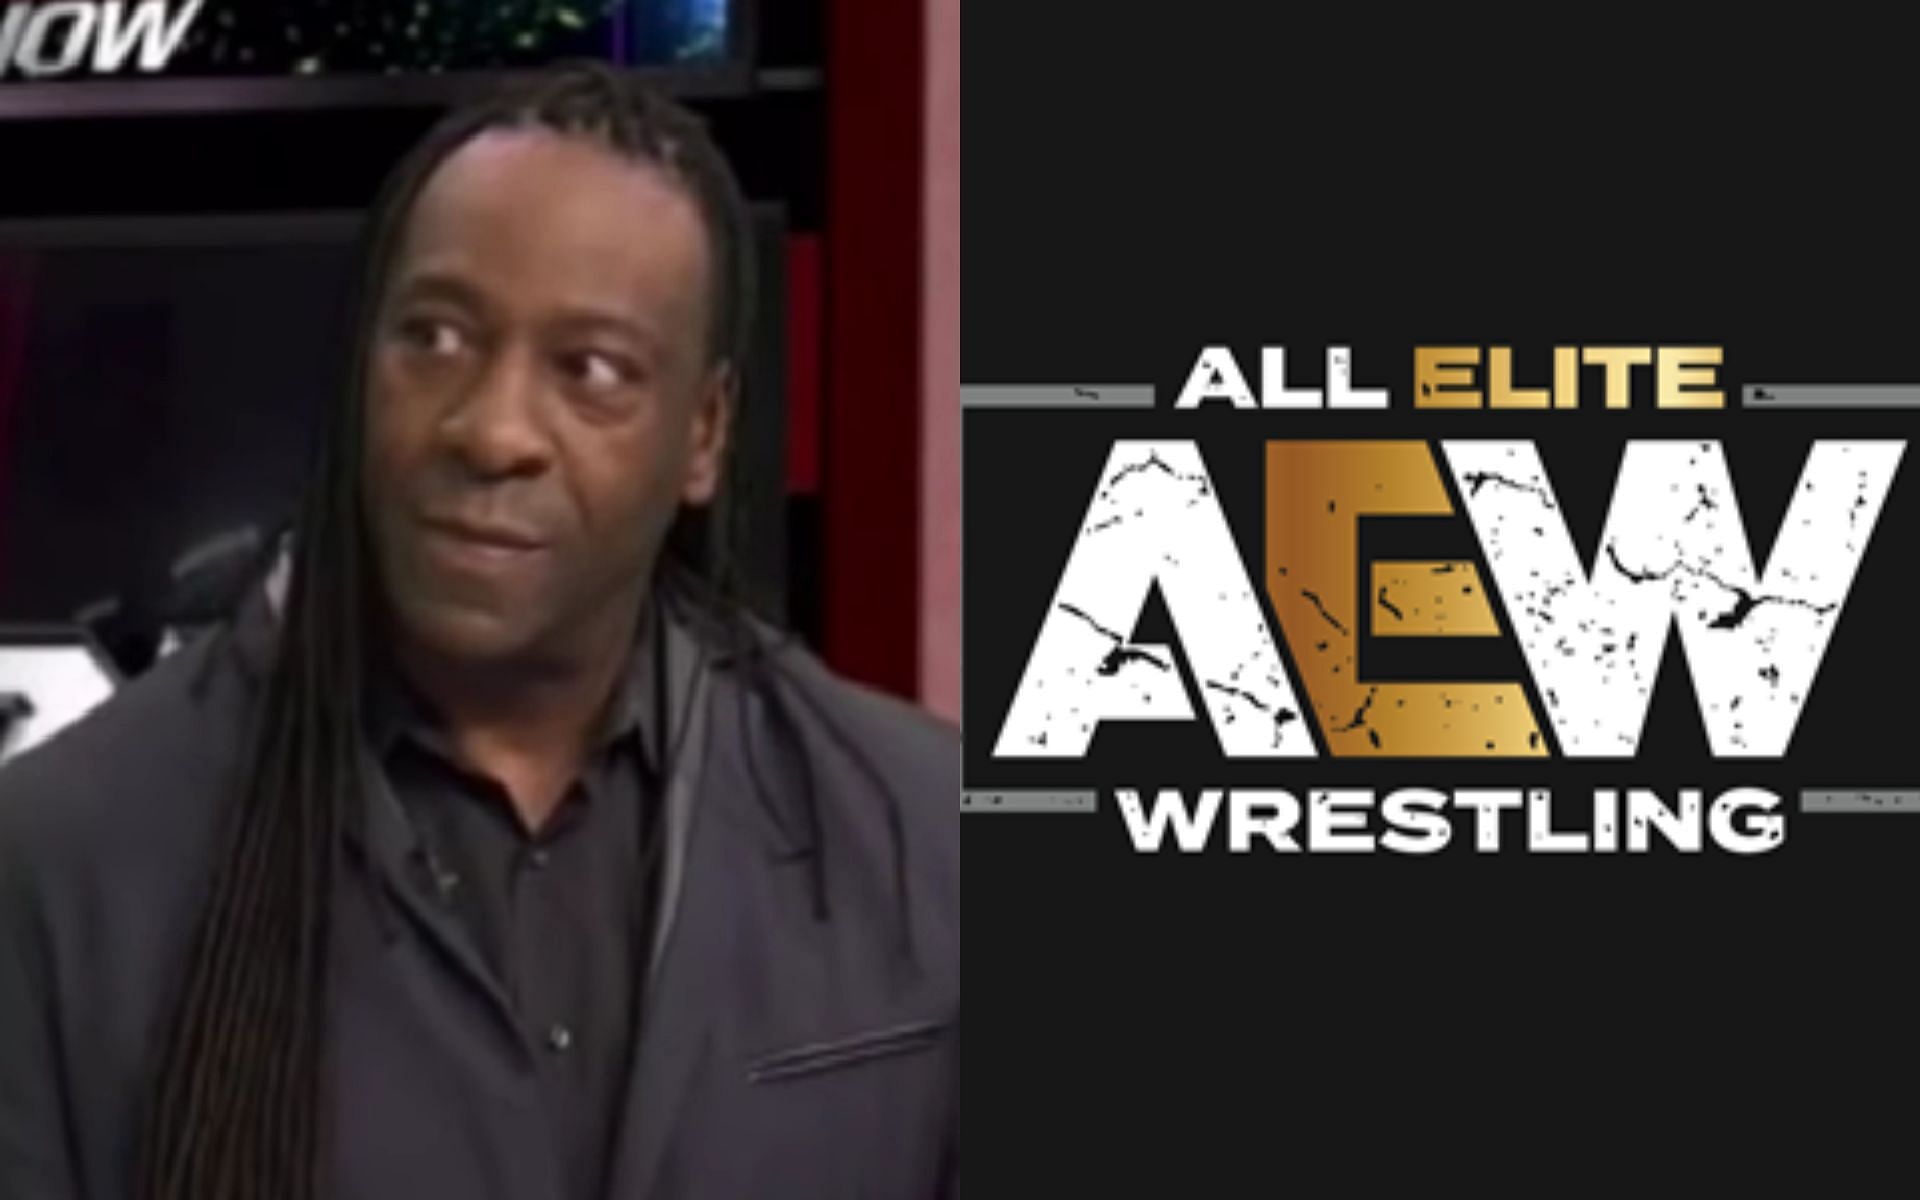 WWE Hall of Famer Booker T has been vocal about AEW